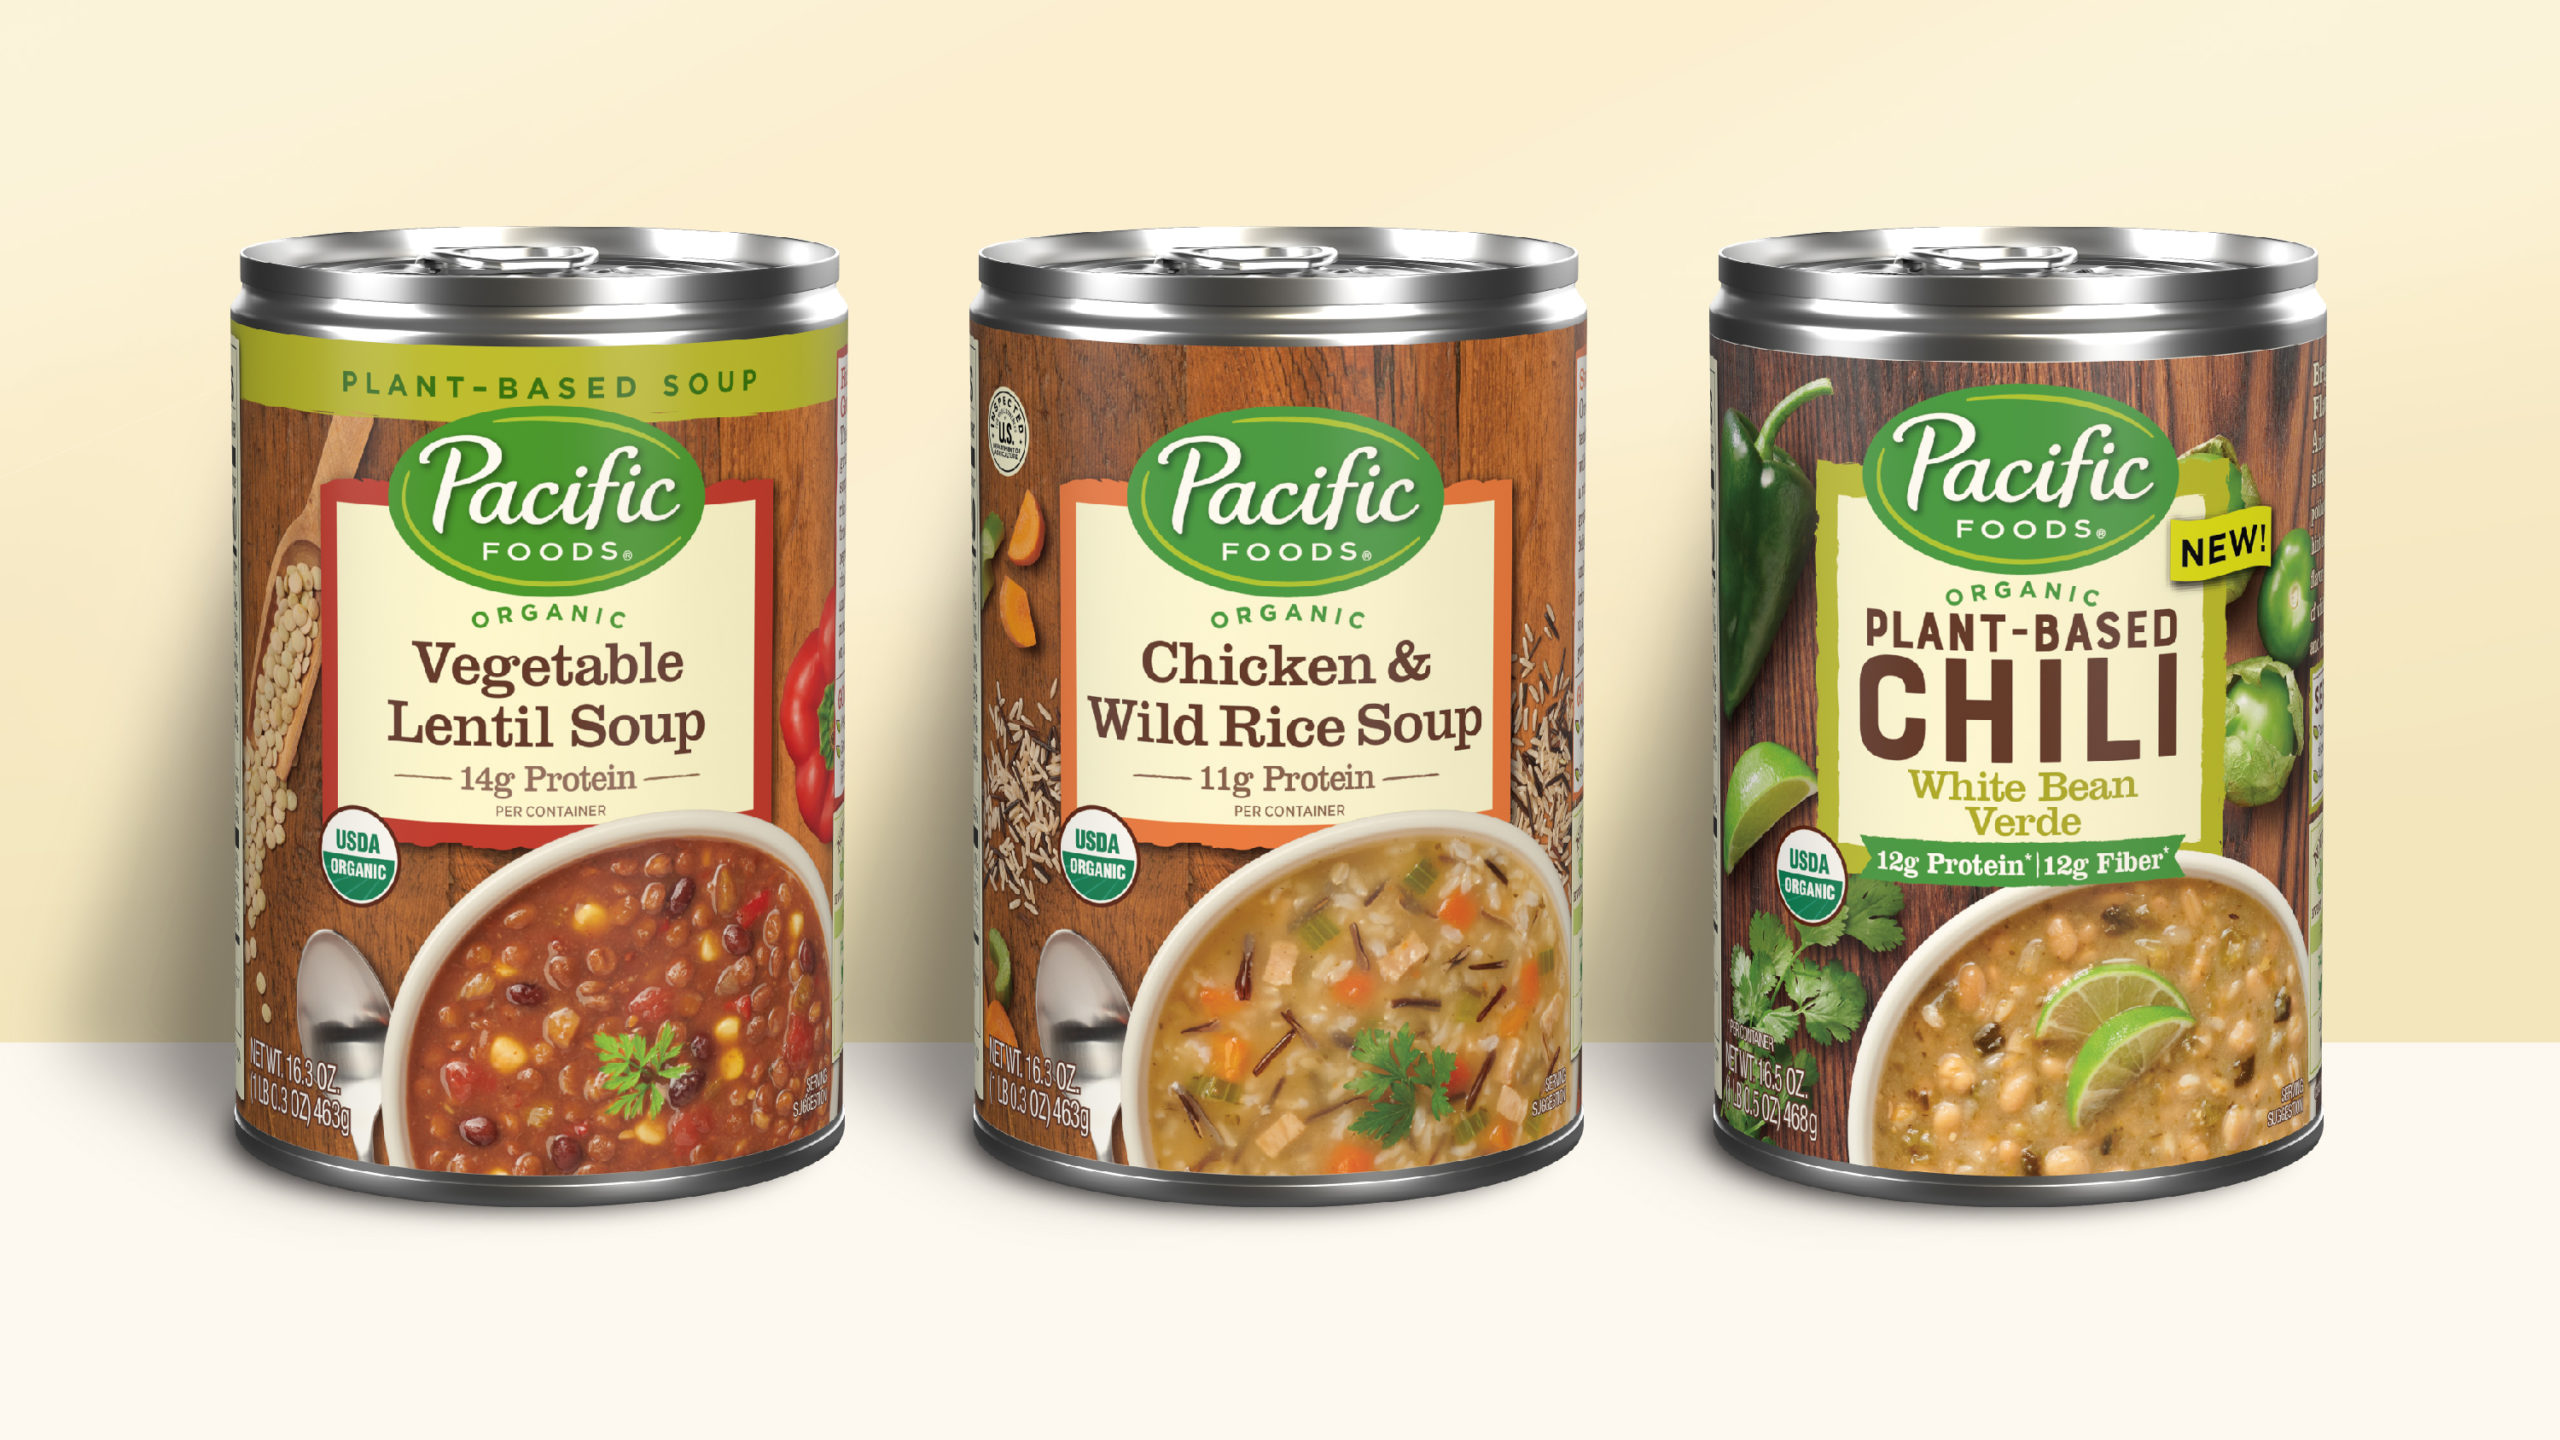 https://www.campbellsoupcompany.com/wp-content/uploads/2022/09/Pacific-RTS-Soup-Chili-16x9-1-scaled.jpg